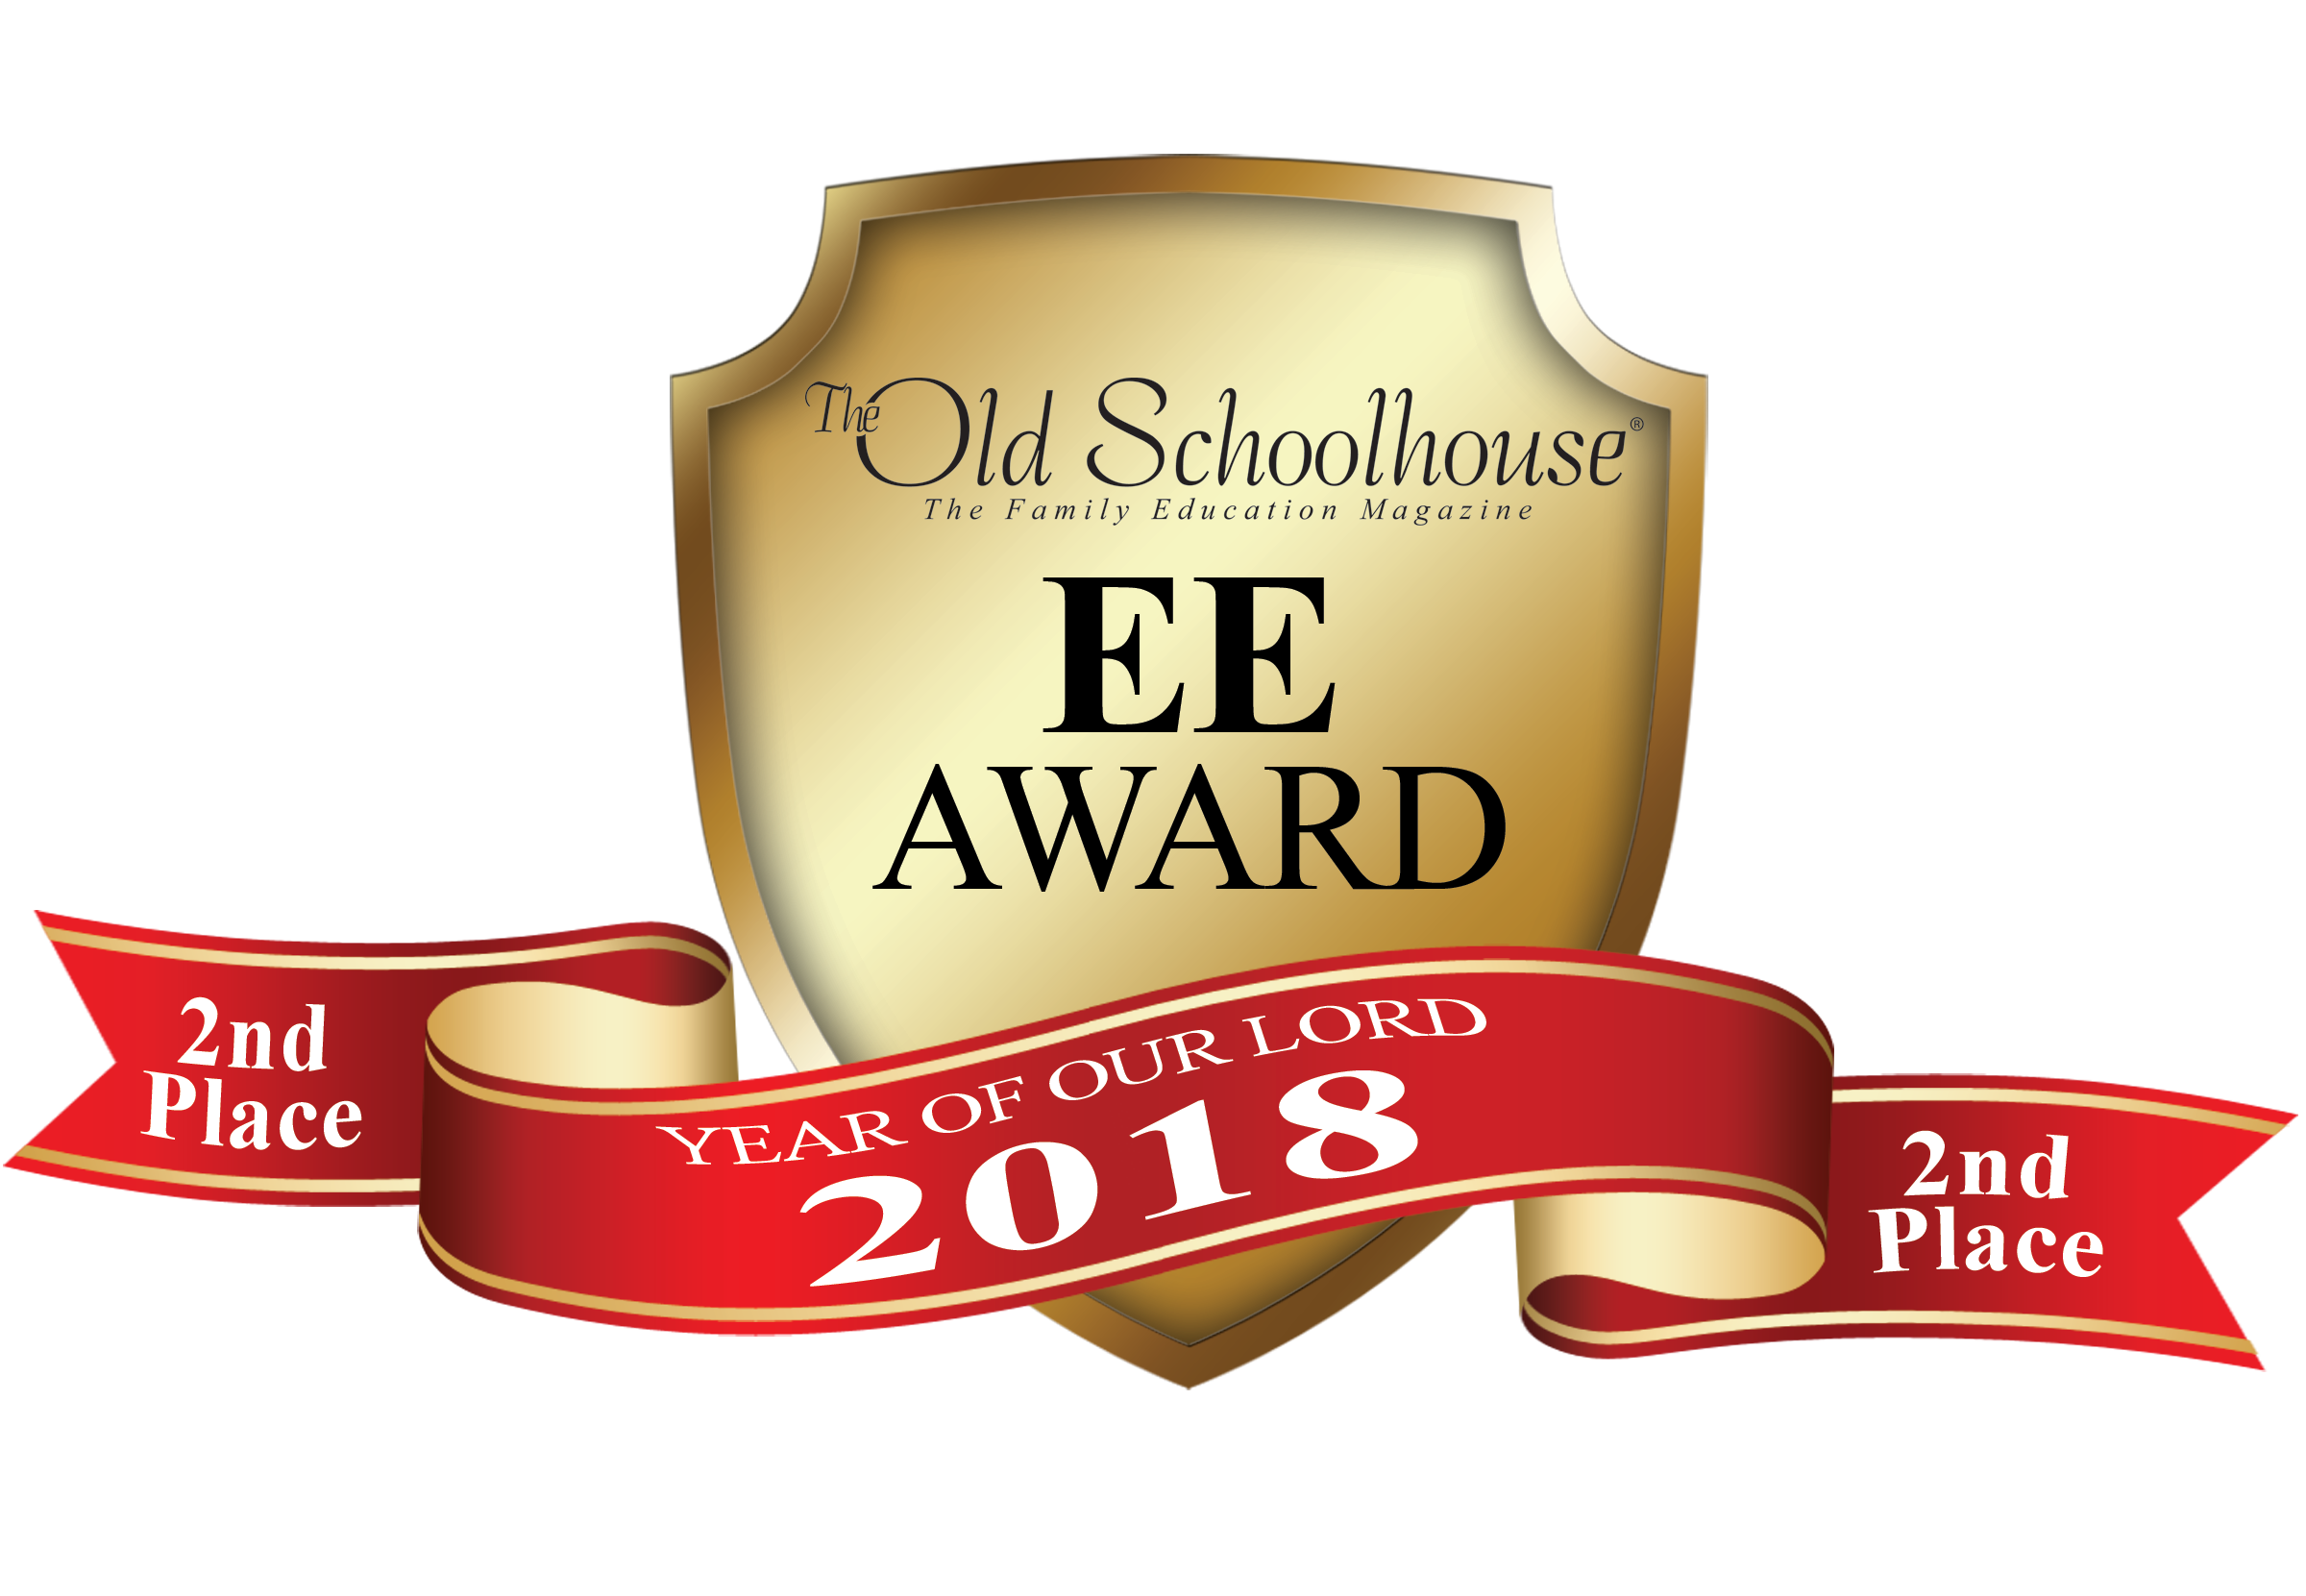 The Old Schoolhouse Excellence in Education Awards